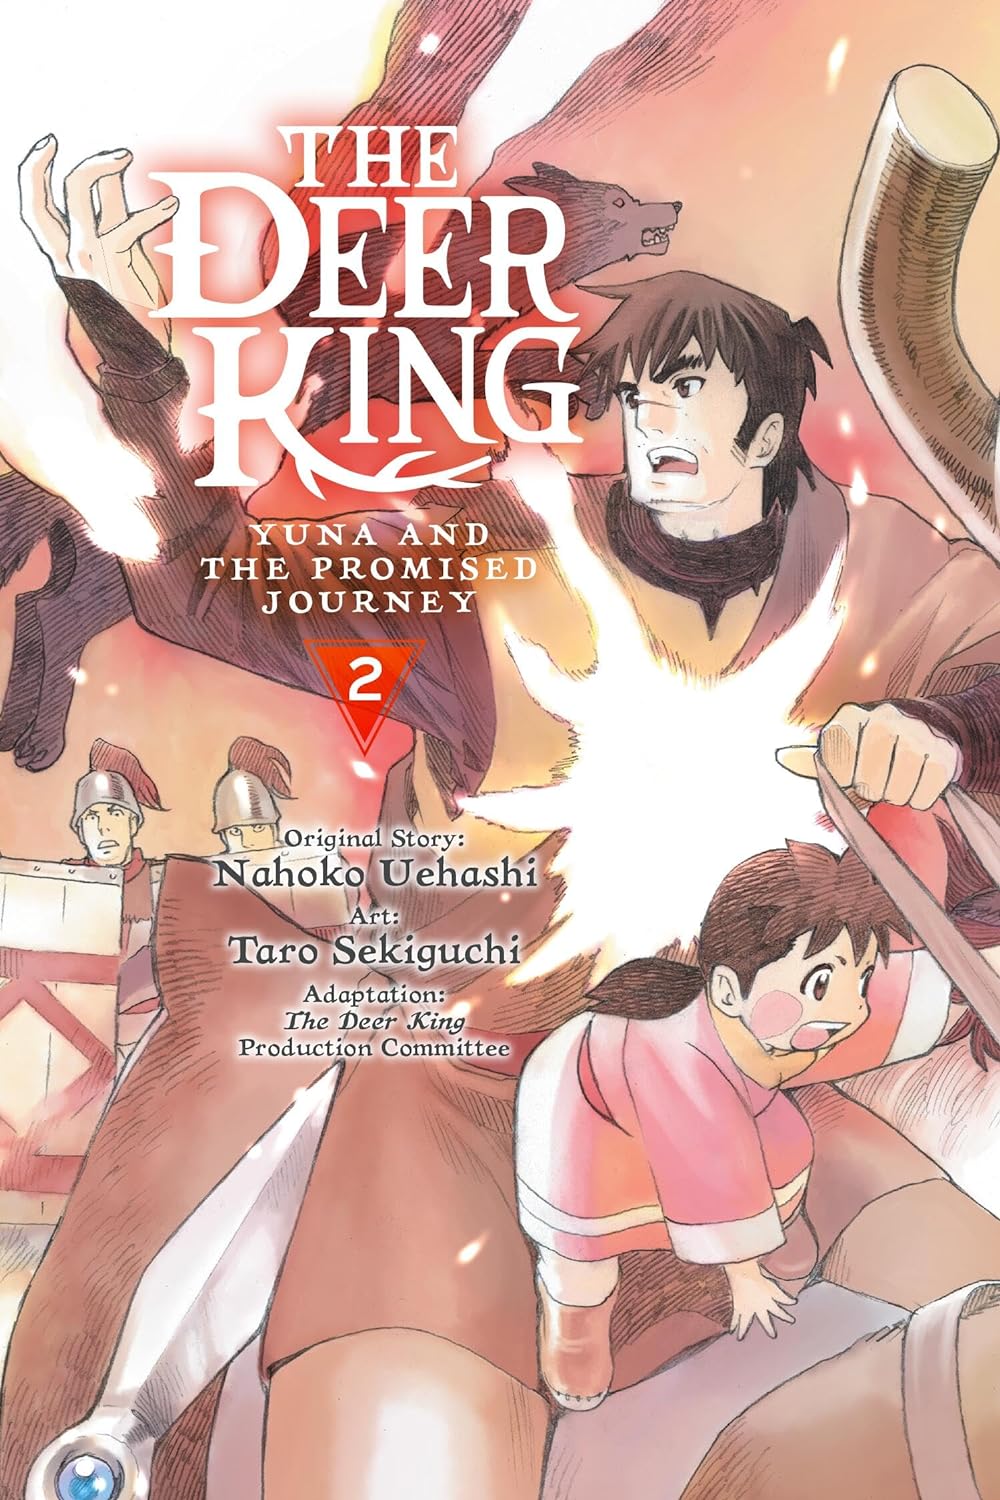 (23/01/2024) The Deer King Vol. 02 (Manga): Yuna and the Promised Journey